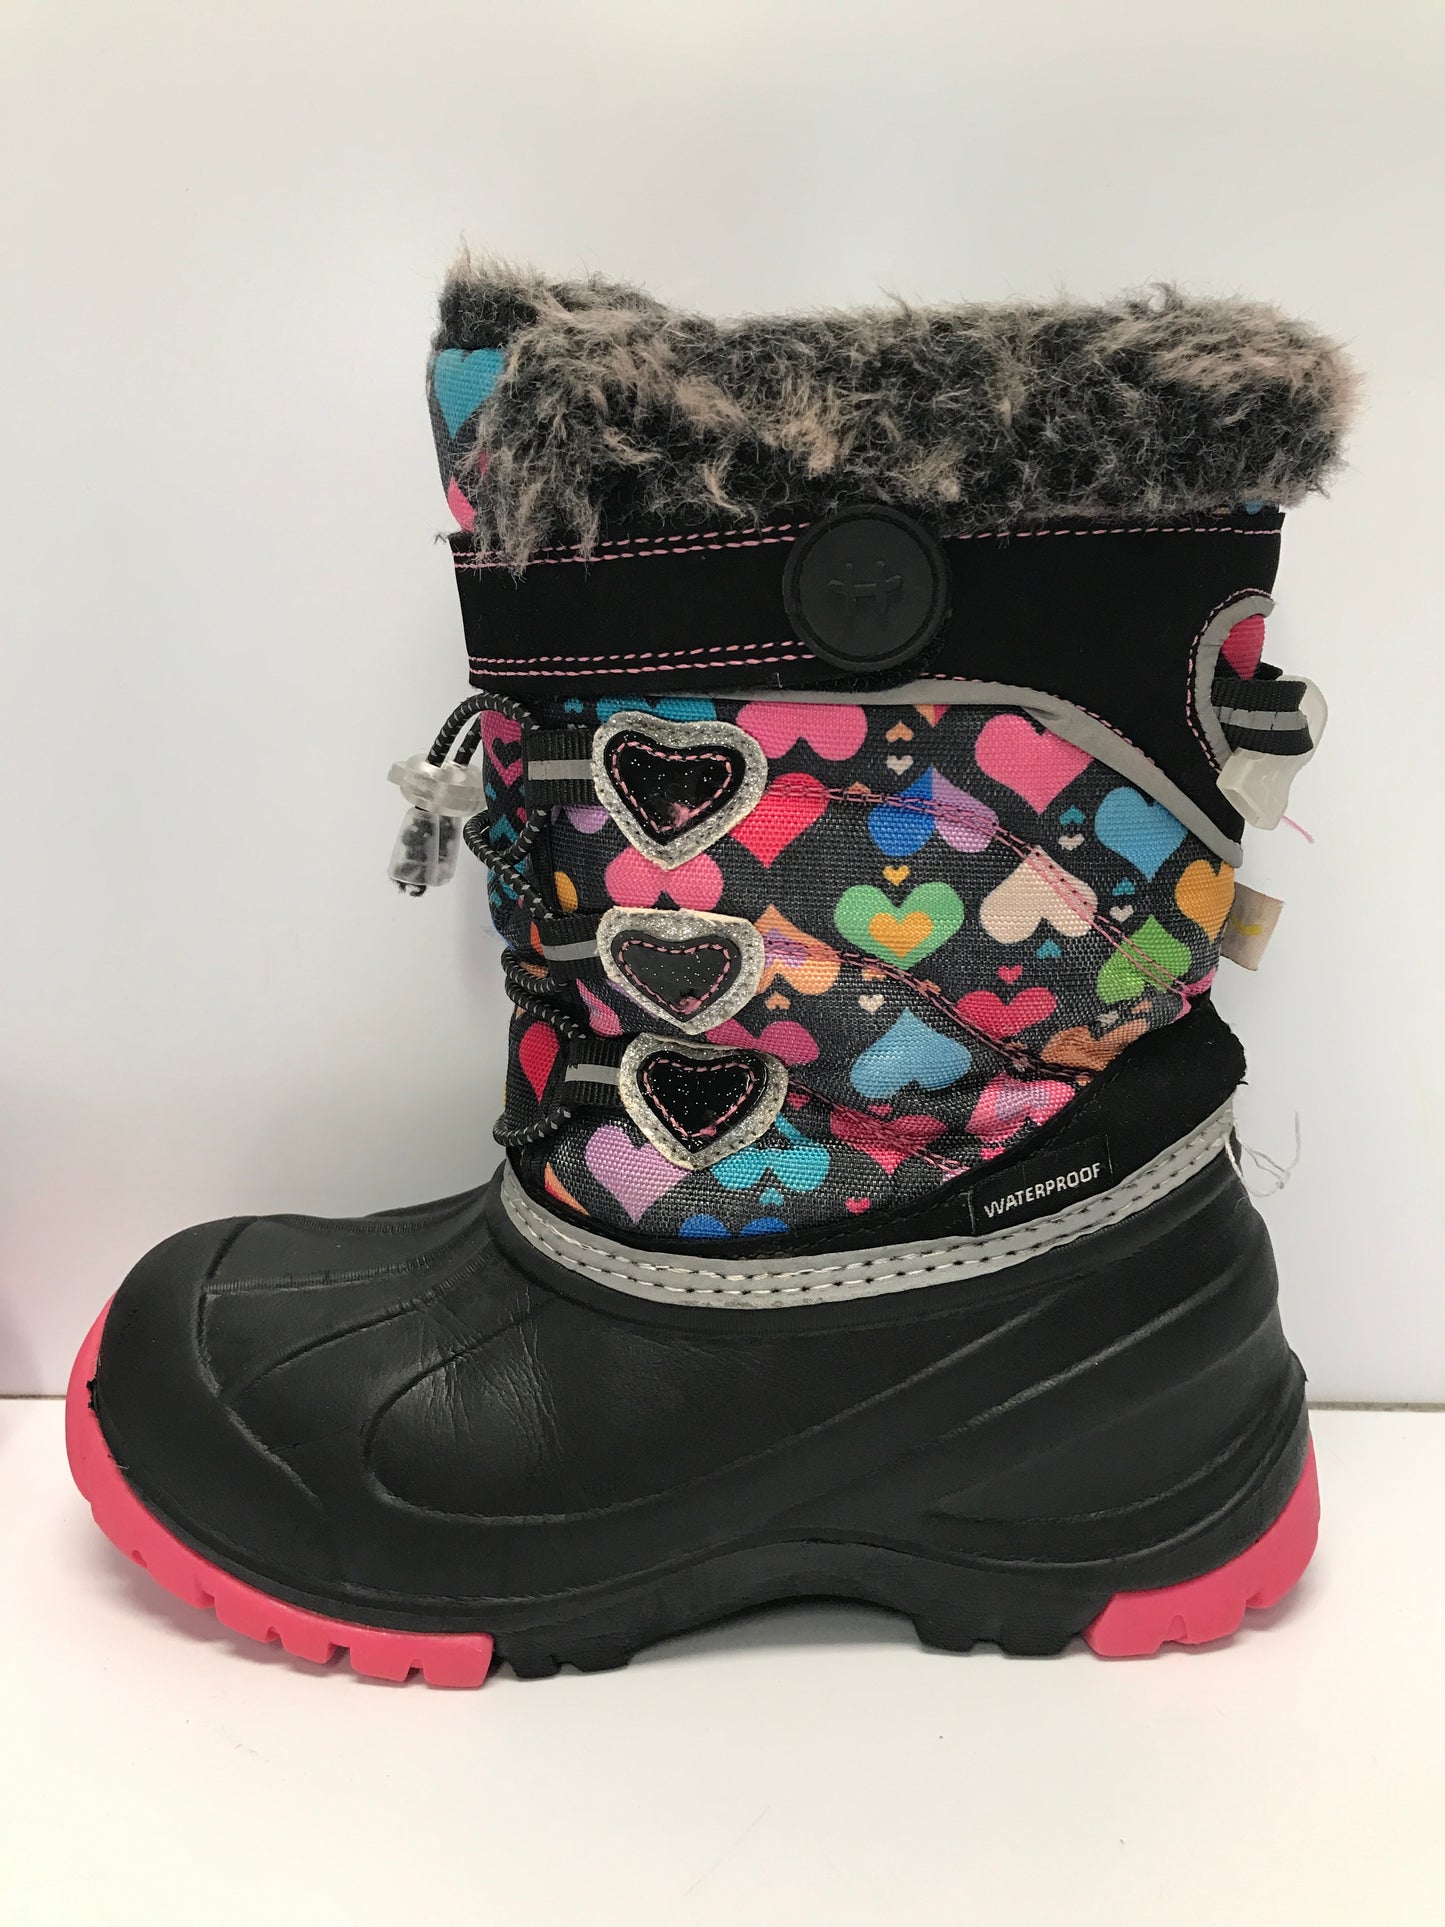 Winter Boots Child Size 1 Hot Paws Waterproof  Black Pink With Hearts Faux Fur With Excellent